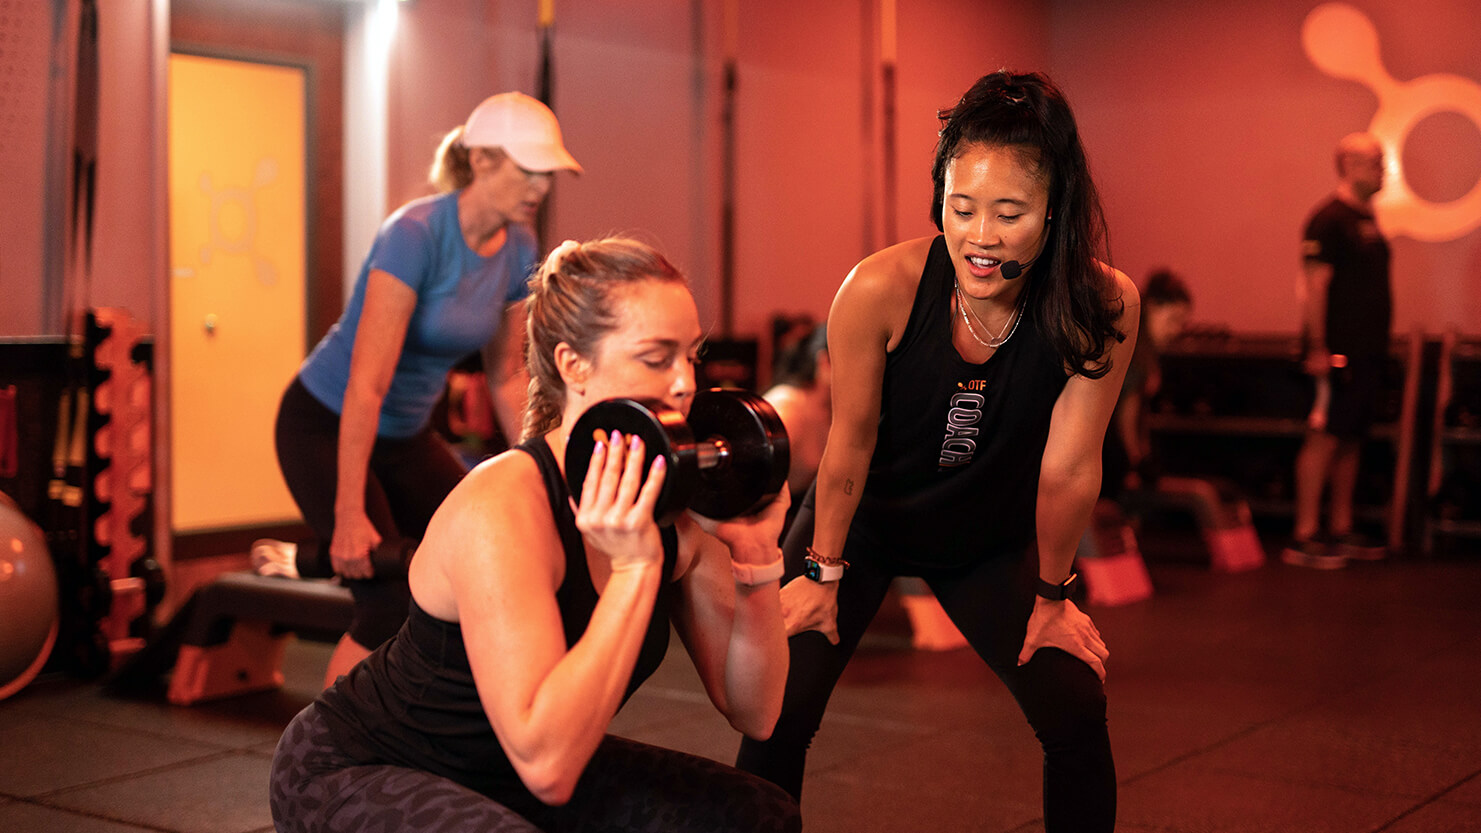 A coach supports a client at Orange Theory during a workout